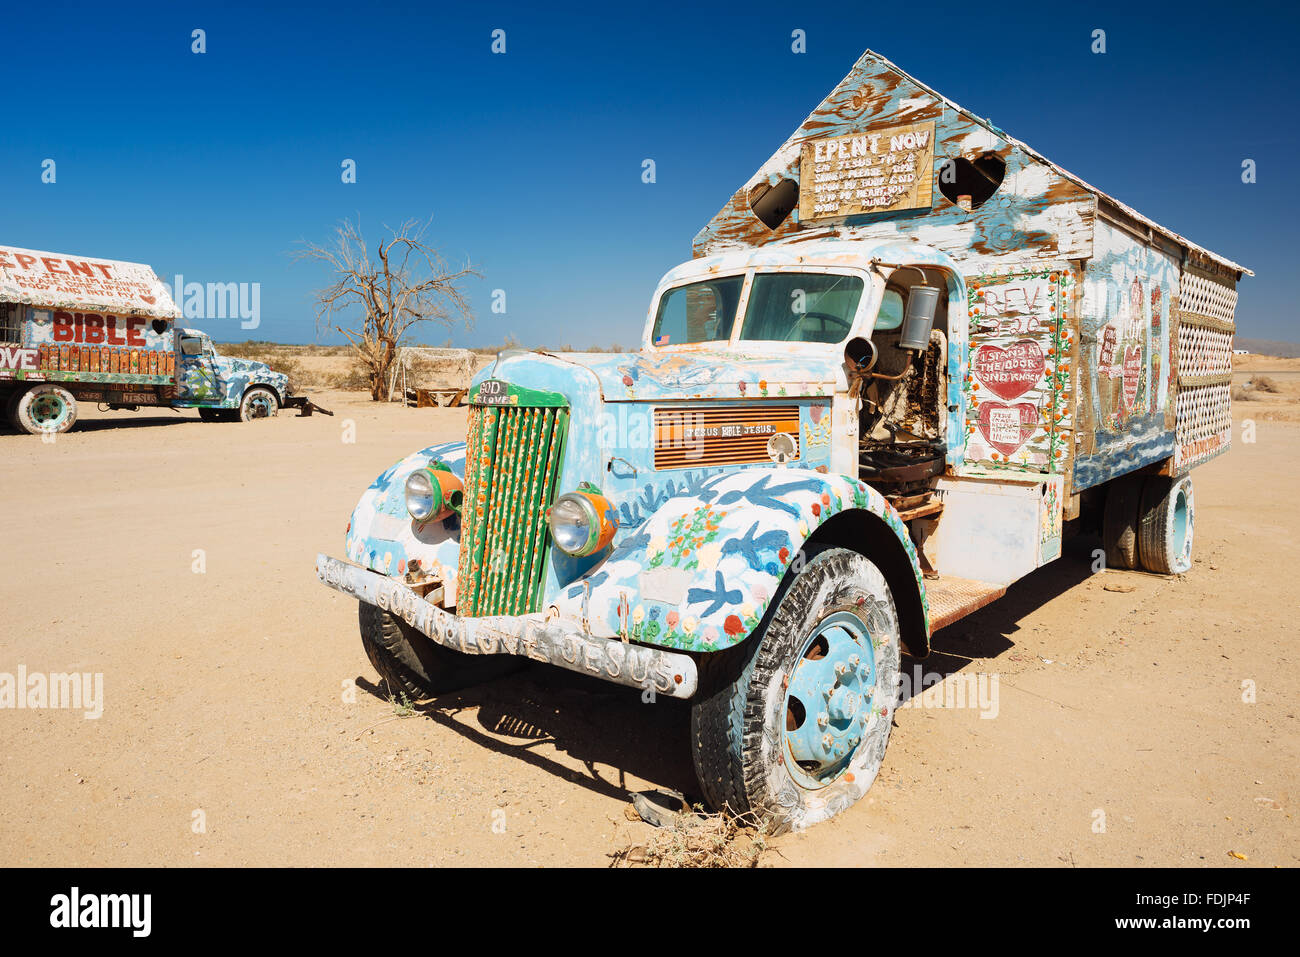 Trucks painted with religious slogans by Leonard Knight, the creator of Salvation Mountain in Slab City, California Stock Photo